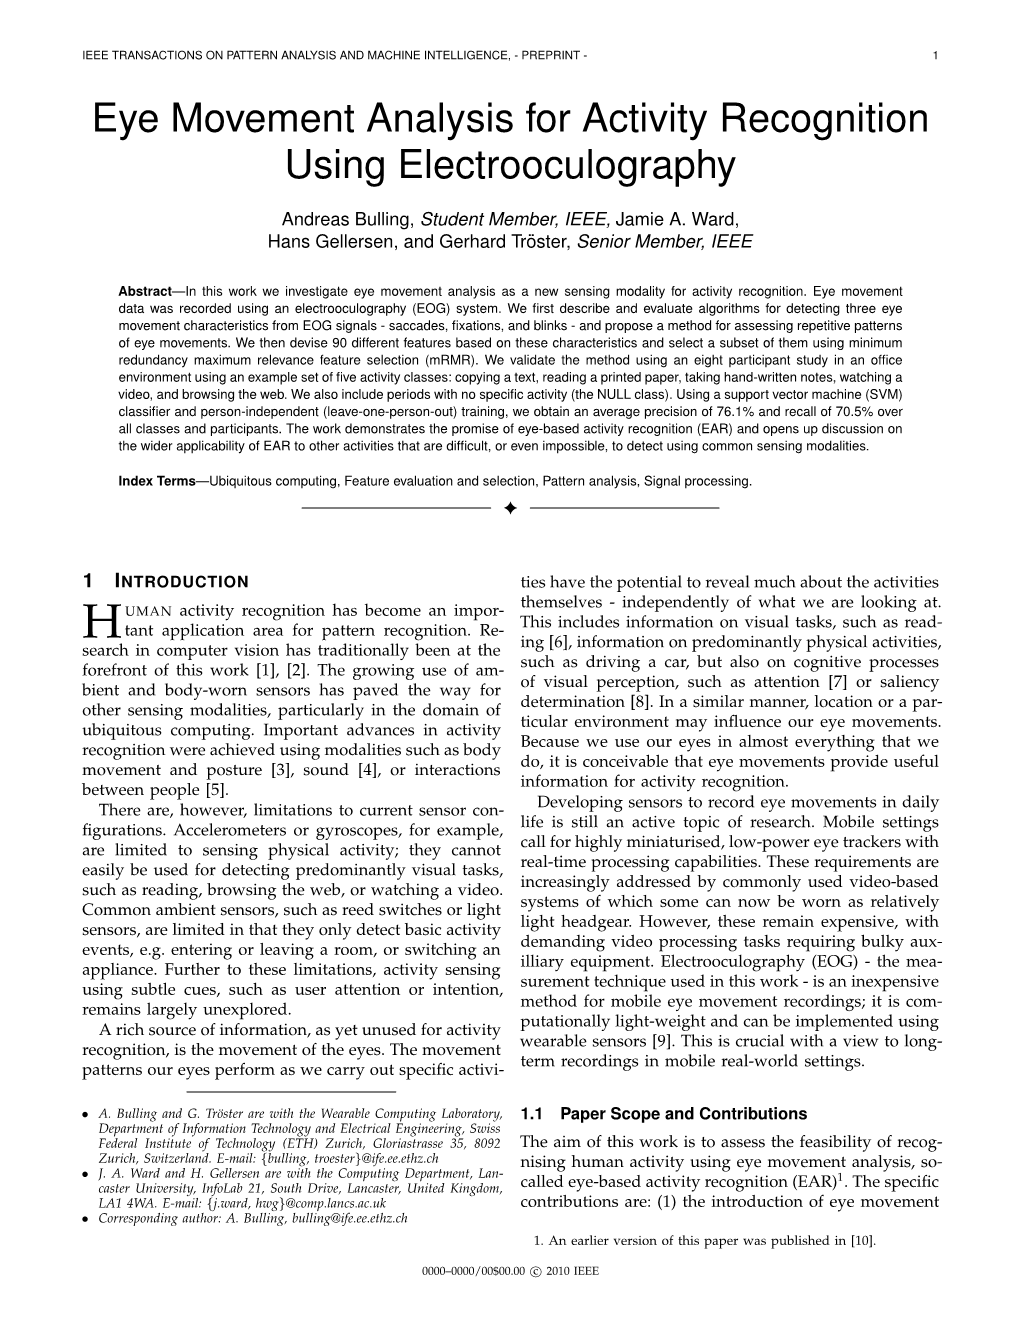 Eye Movement Analysis for Activity Recognition Using Electrooculography